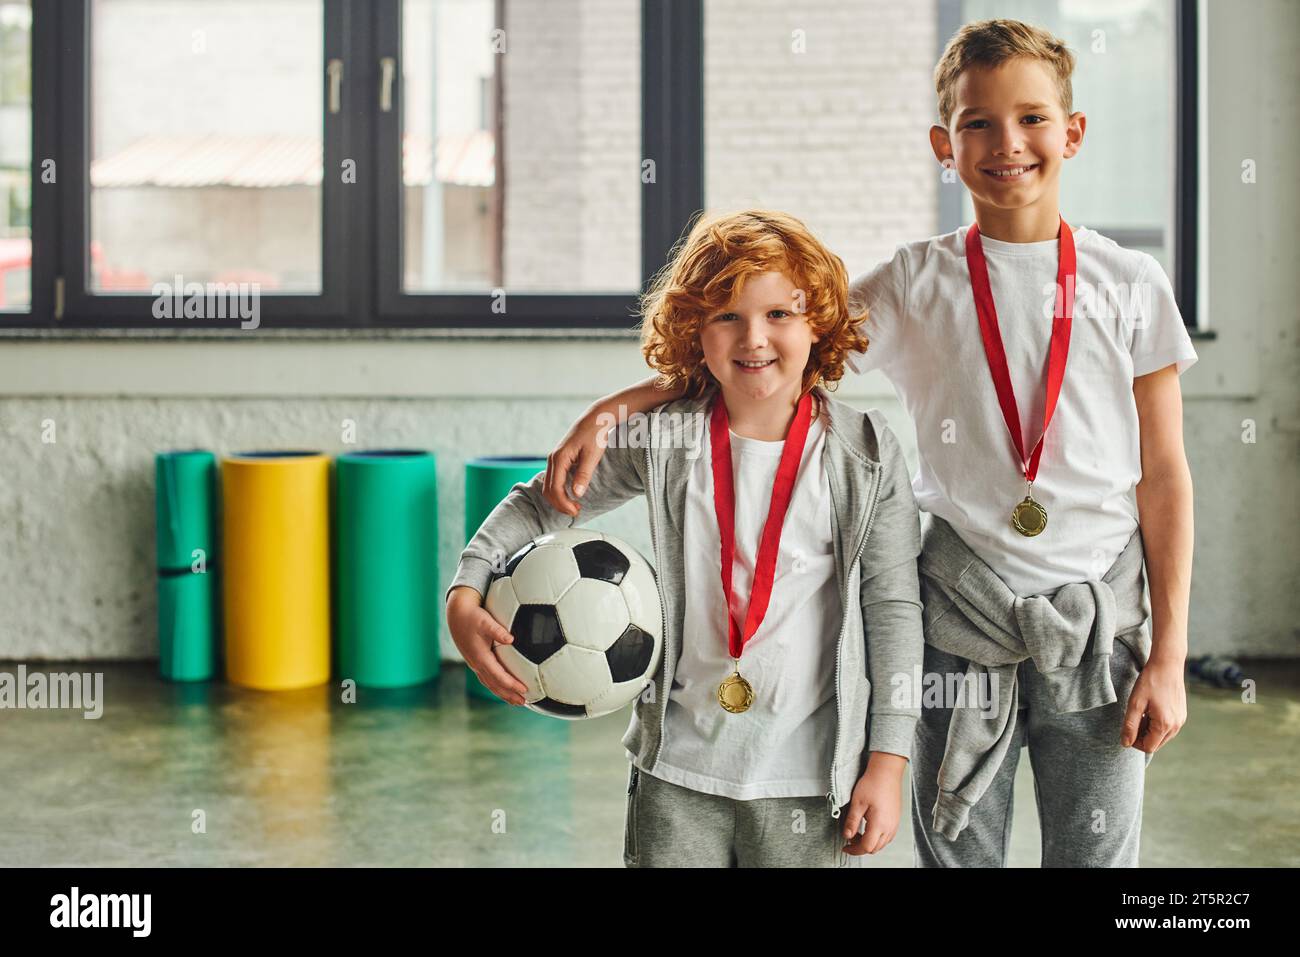 two cheerful boys in sportswear with golden medals holding soccer ball and smiling at camera, sport Stock Photo